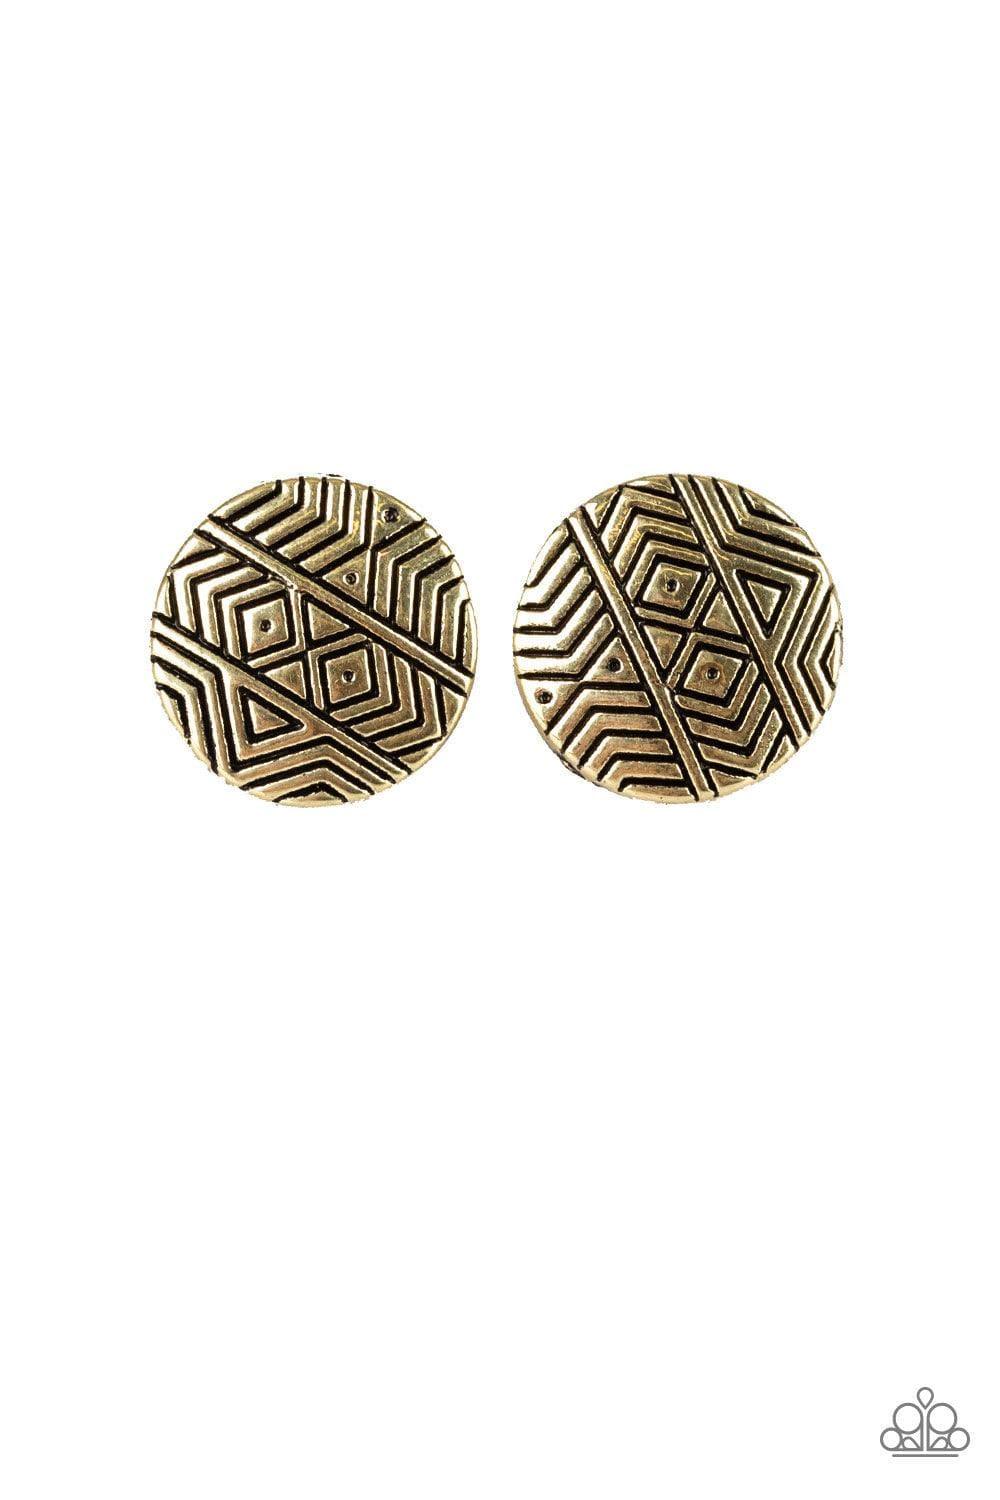 Paparazzi Accessories - Bright As a Button - Brass Post Earrings - Bling by JessieK